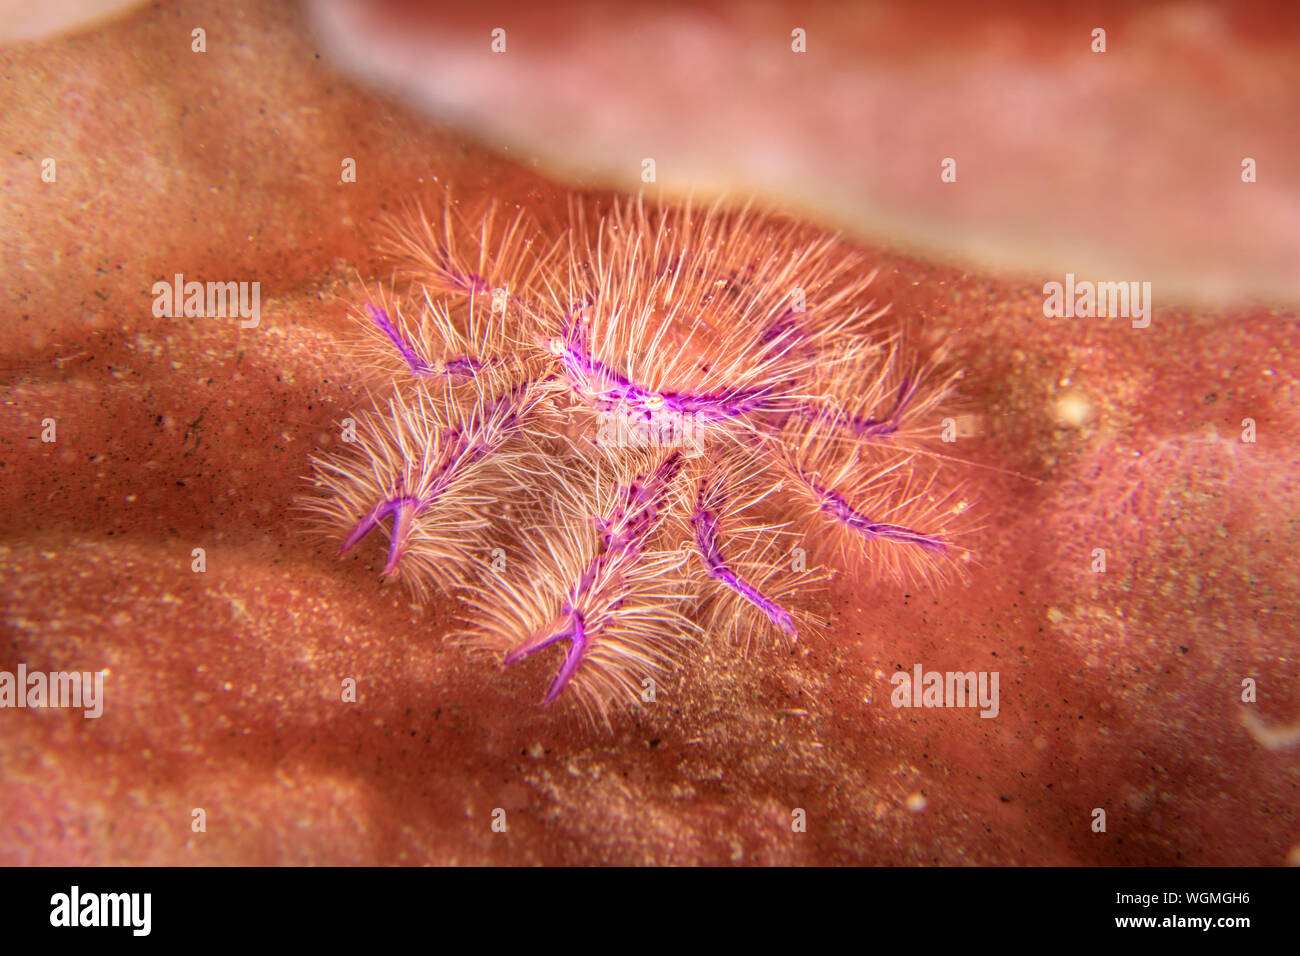 A beautiful purple and pink hairy squat lobster hides in a crevice on a sponge. Stock Photo